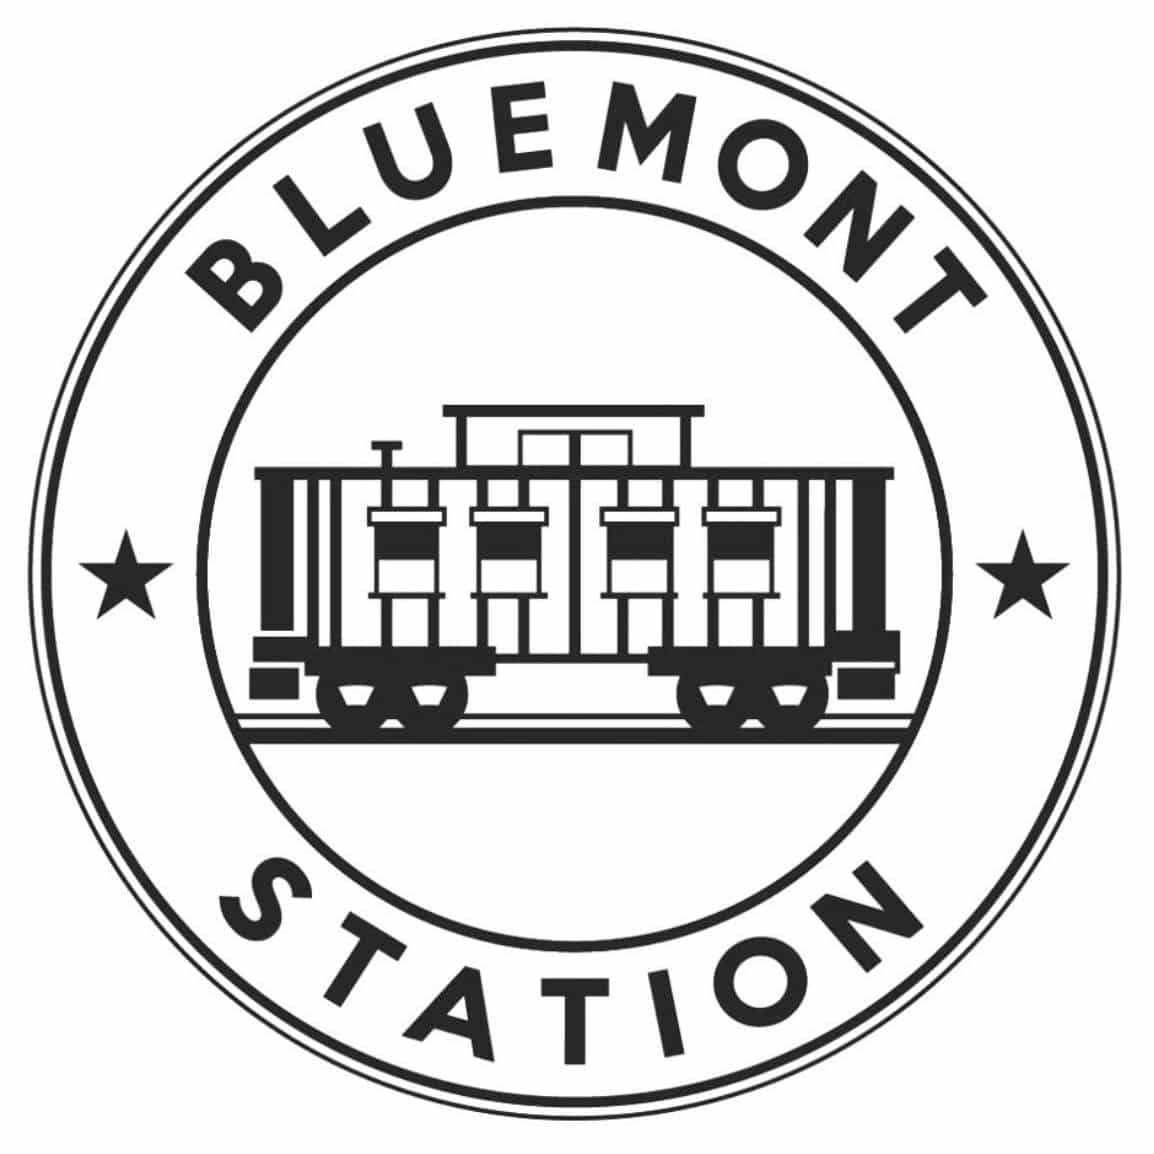 Bluemont Station Brewery & Winery